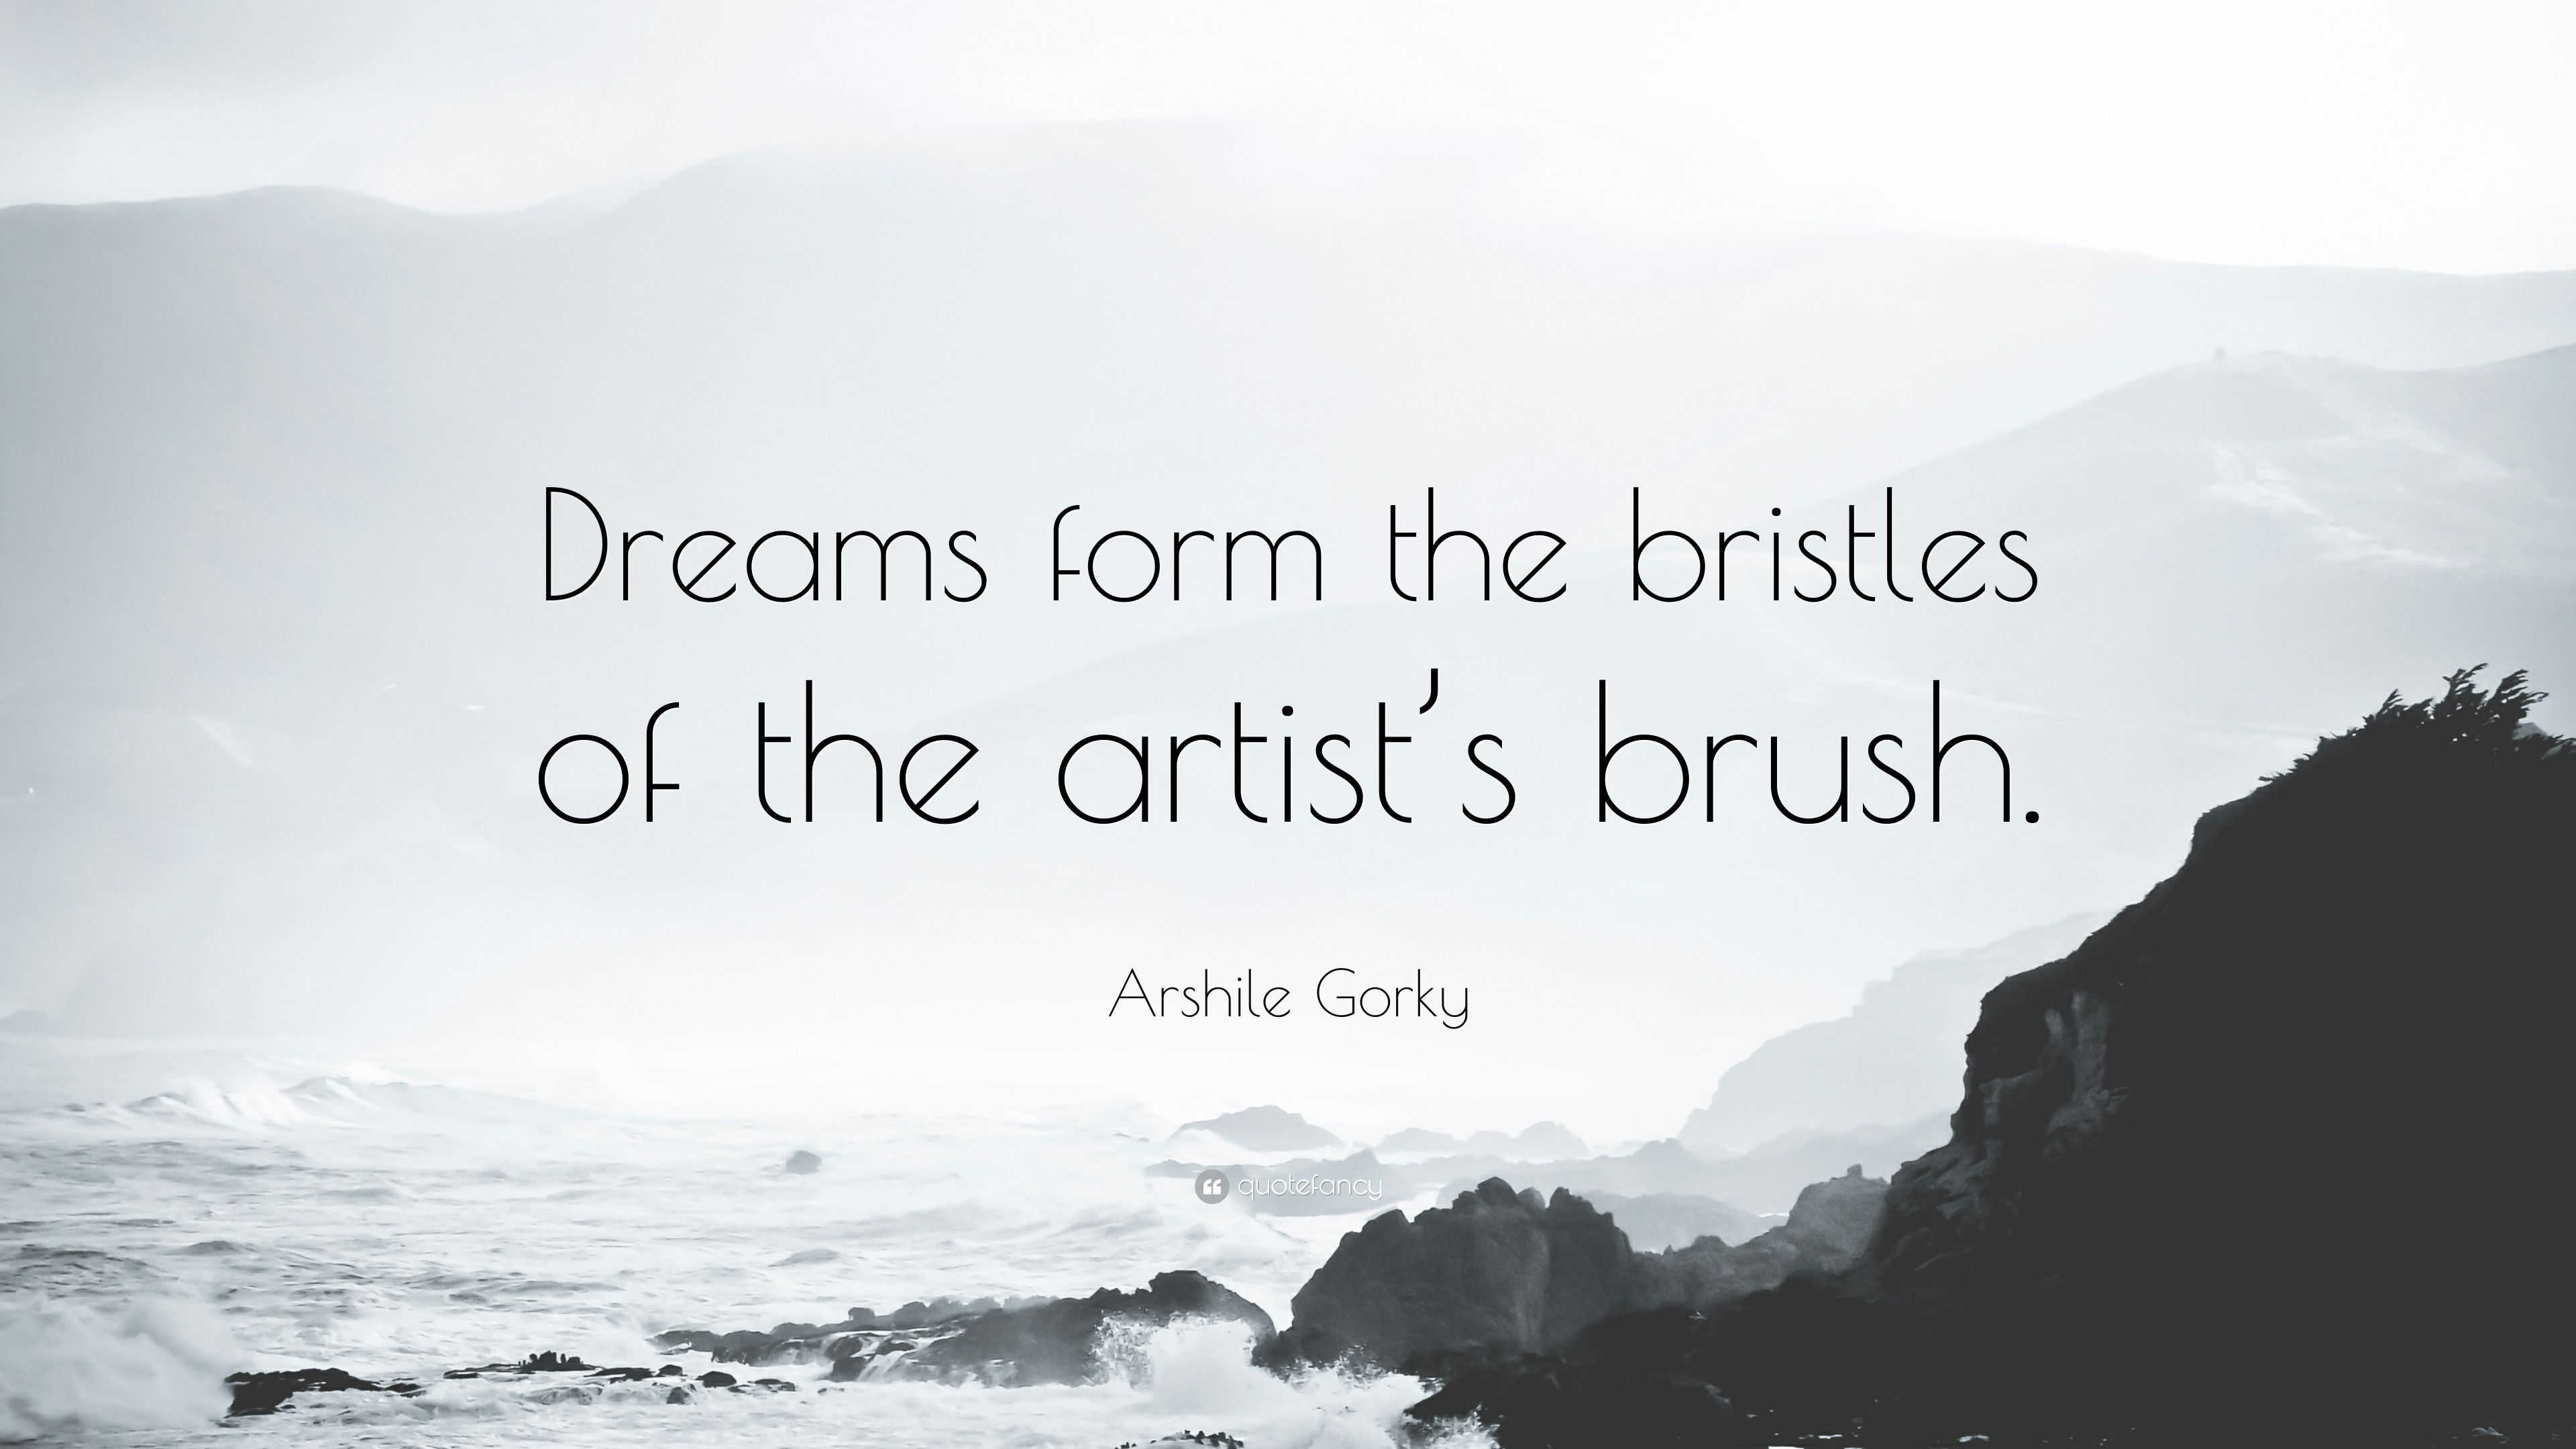 Arshile Gorky Quotes (15 wallpaper)